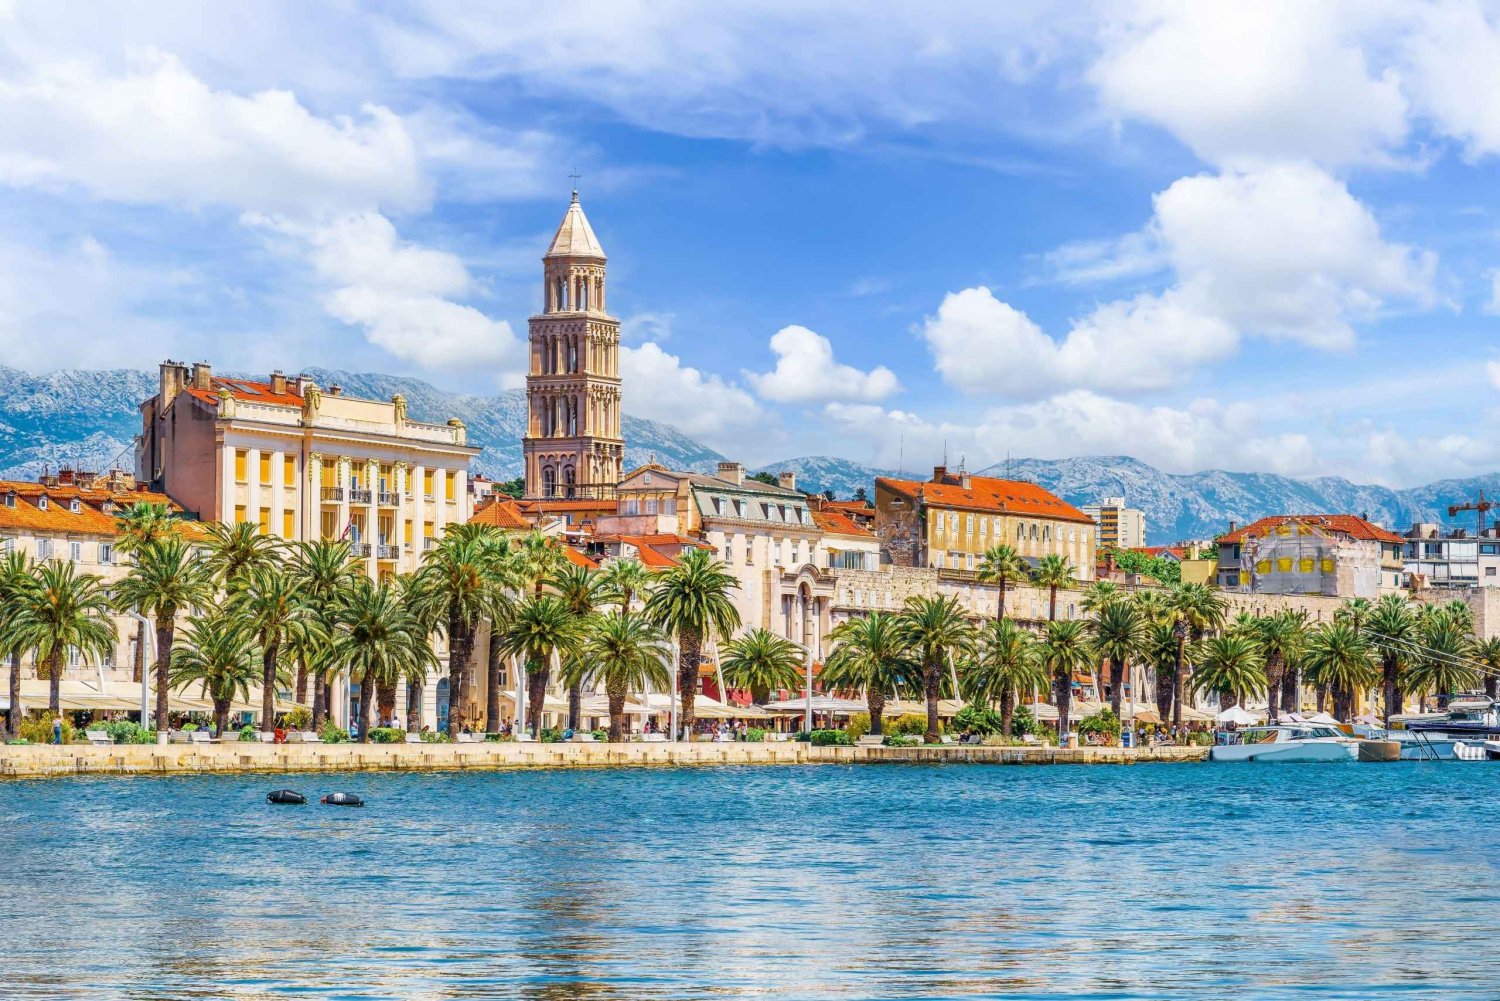 From Dubrovnik: Split Day Trip and City Tour